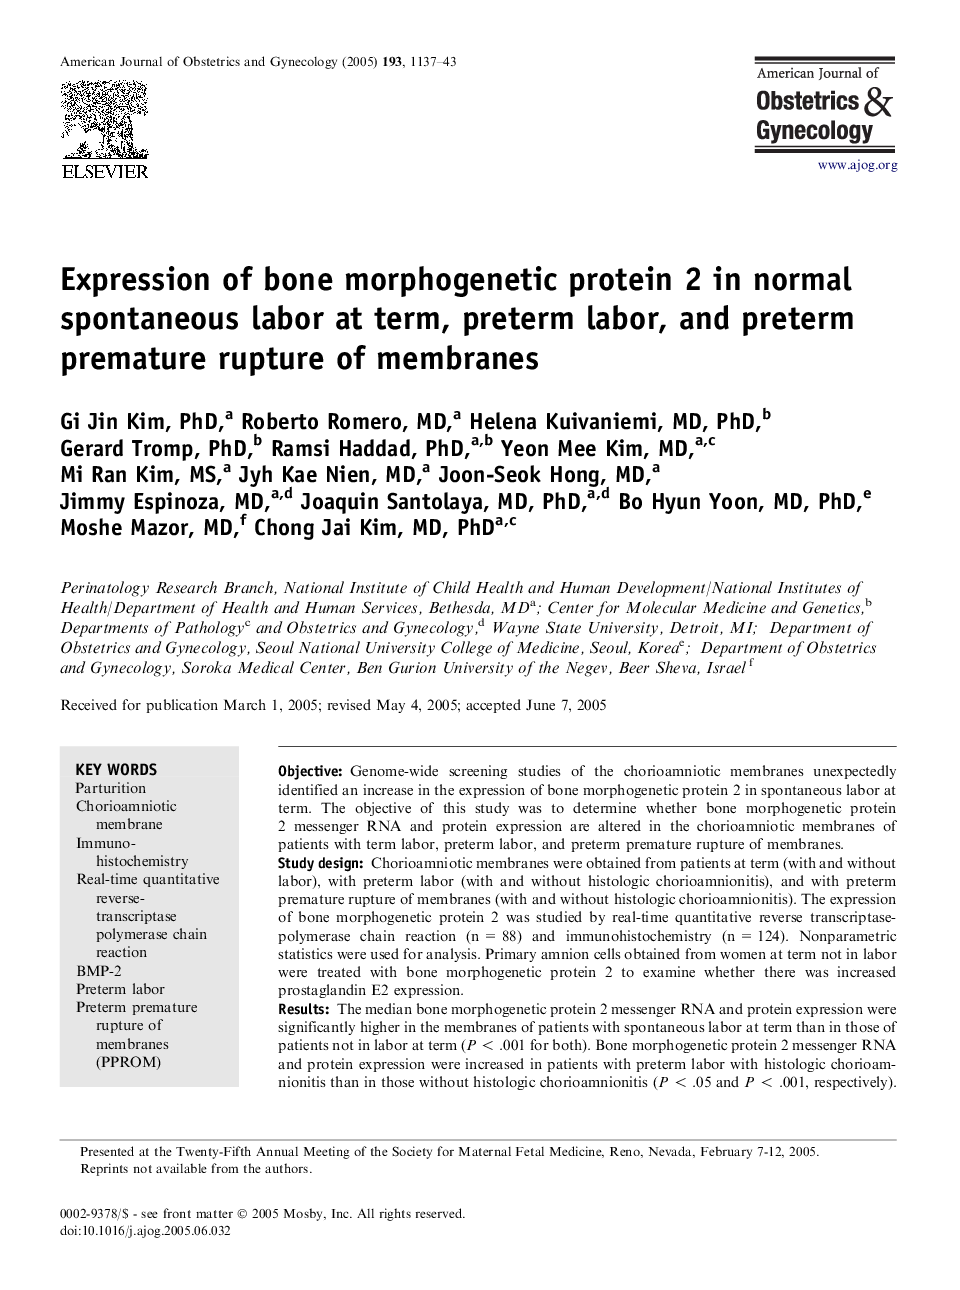 Expression of bone morphogenetic protein 2 in normal spontaneous labor at term, preterm labor, and preterm premature rupture of membranes